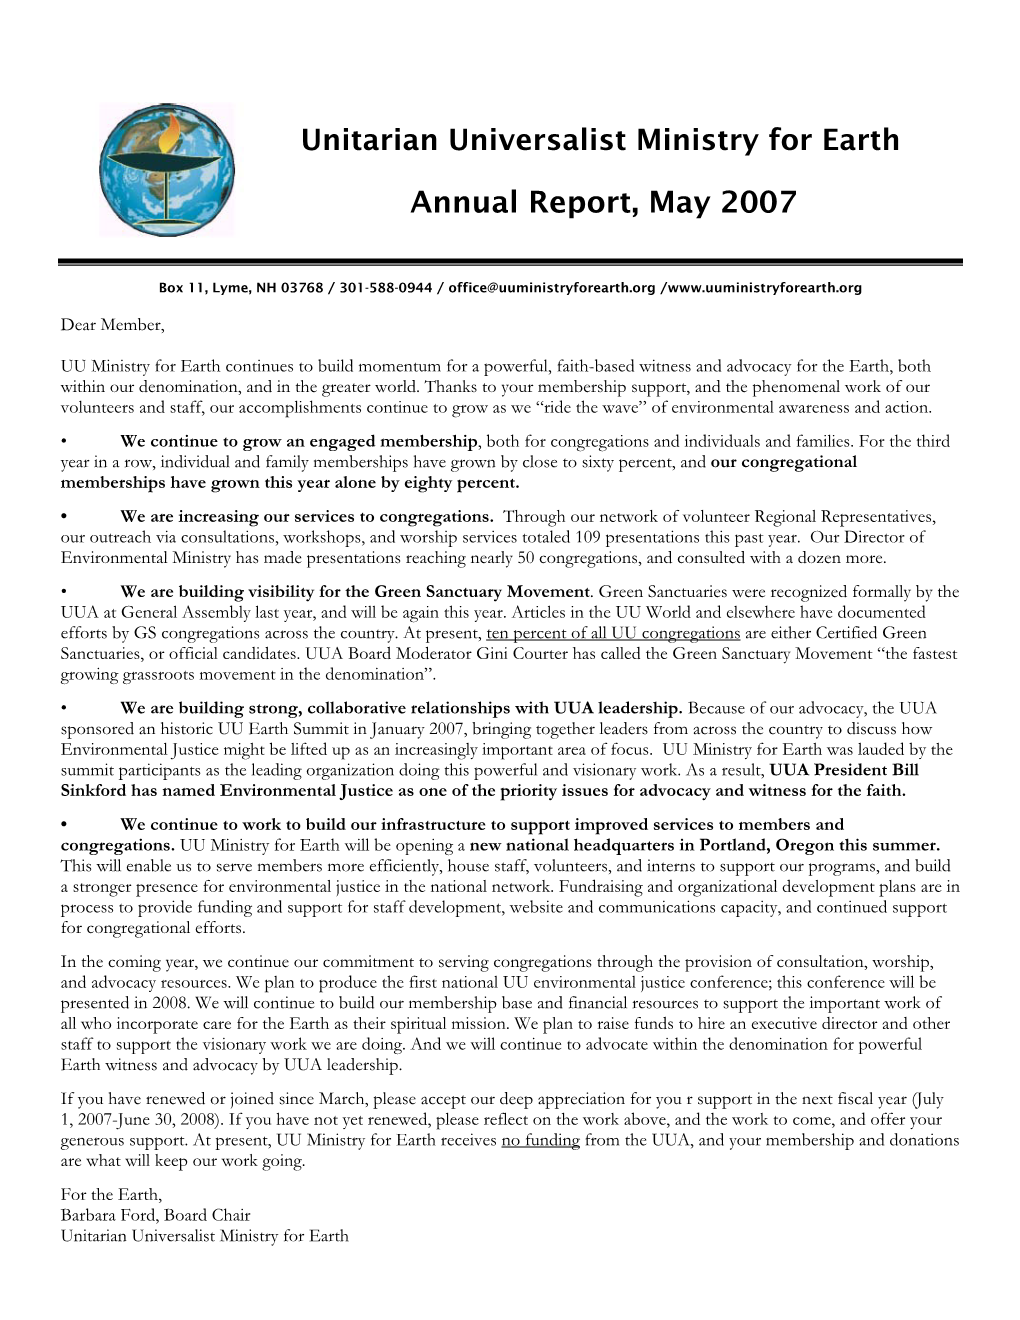 Annual Report, May 2007